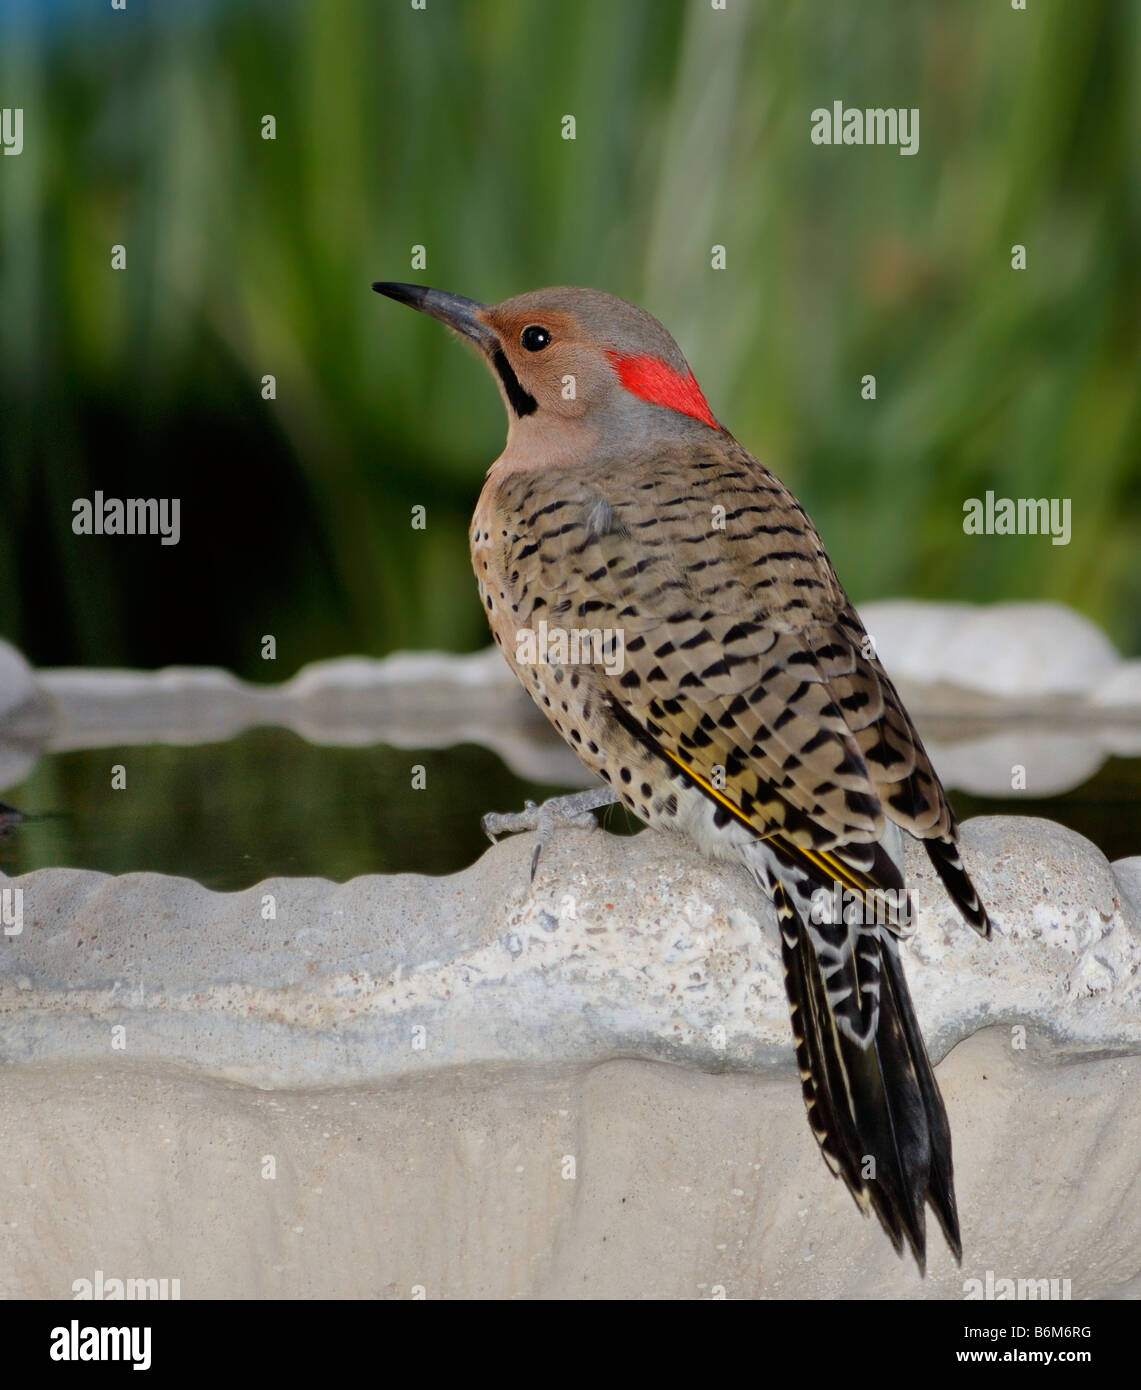 A Yellow-shafted Northern Flicker, Colaptes auratus, drinks from a bird bath. Oklahoma, USA. Stock Photo